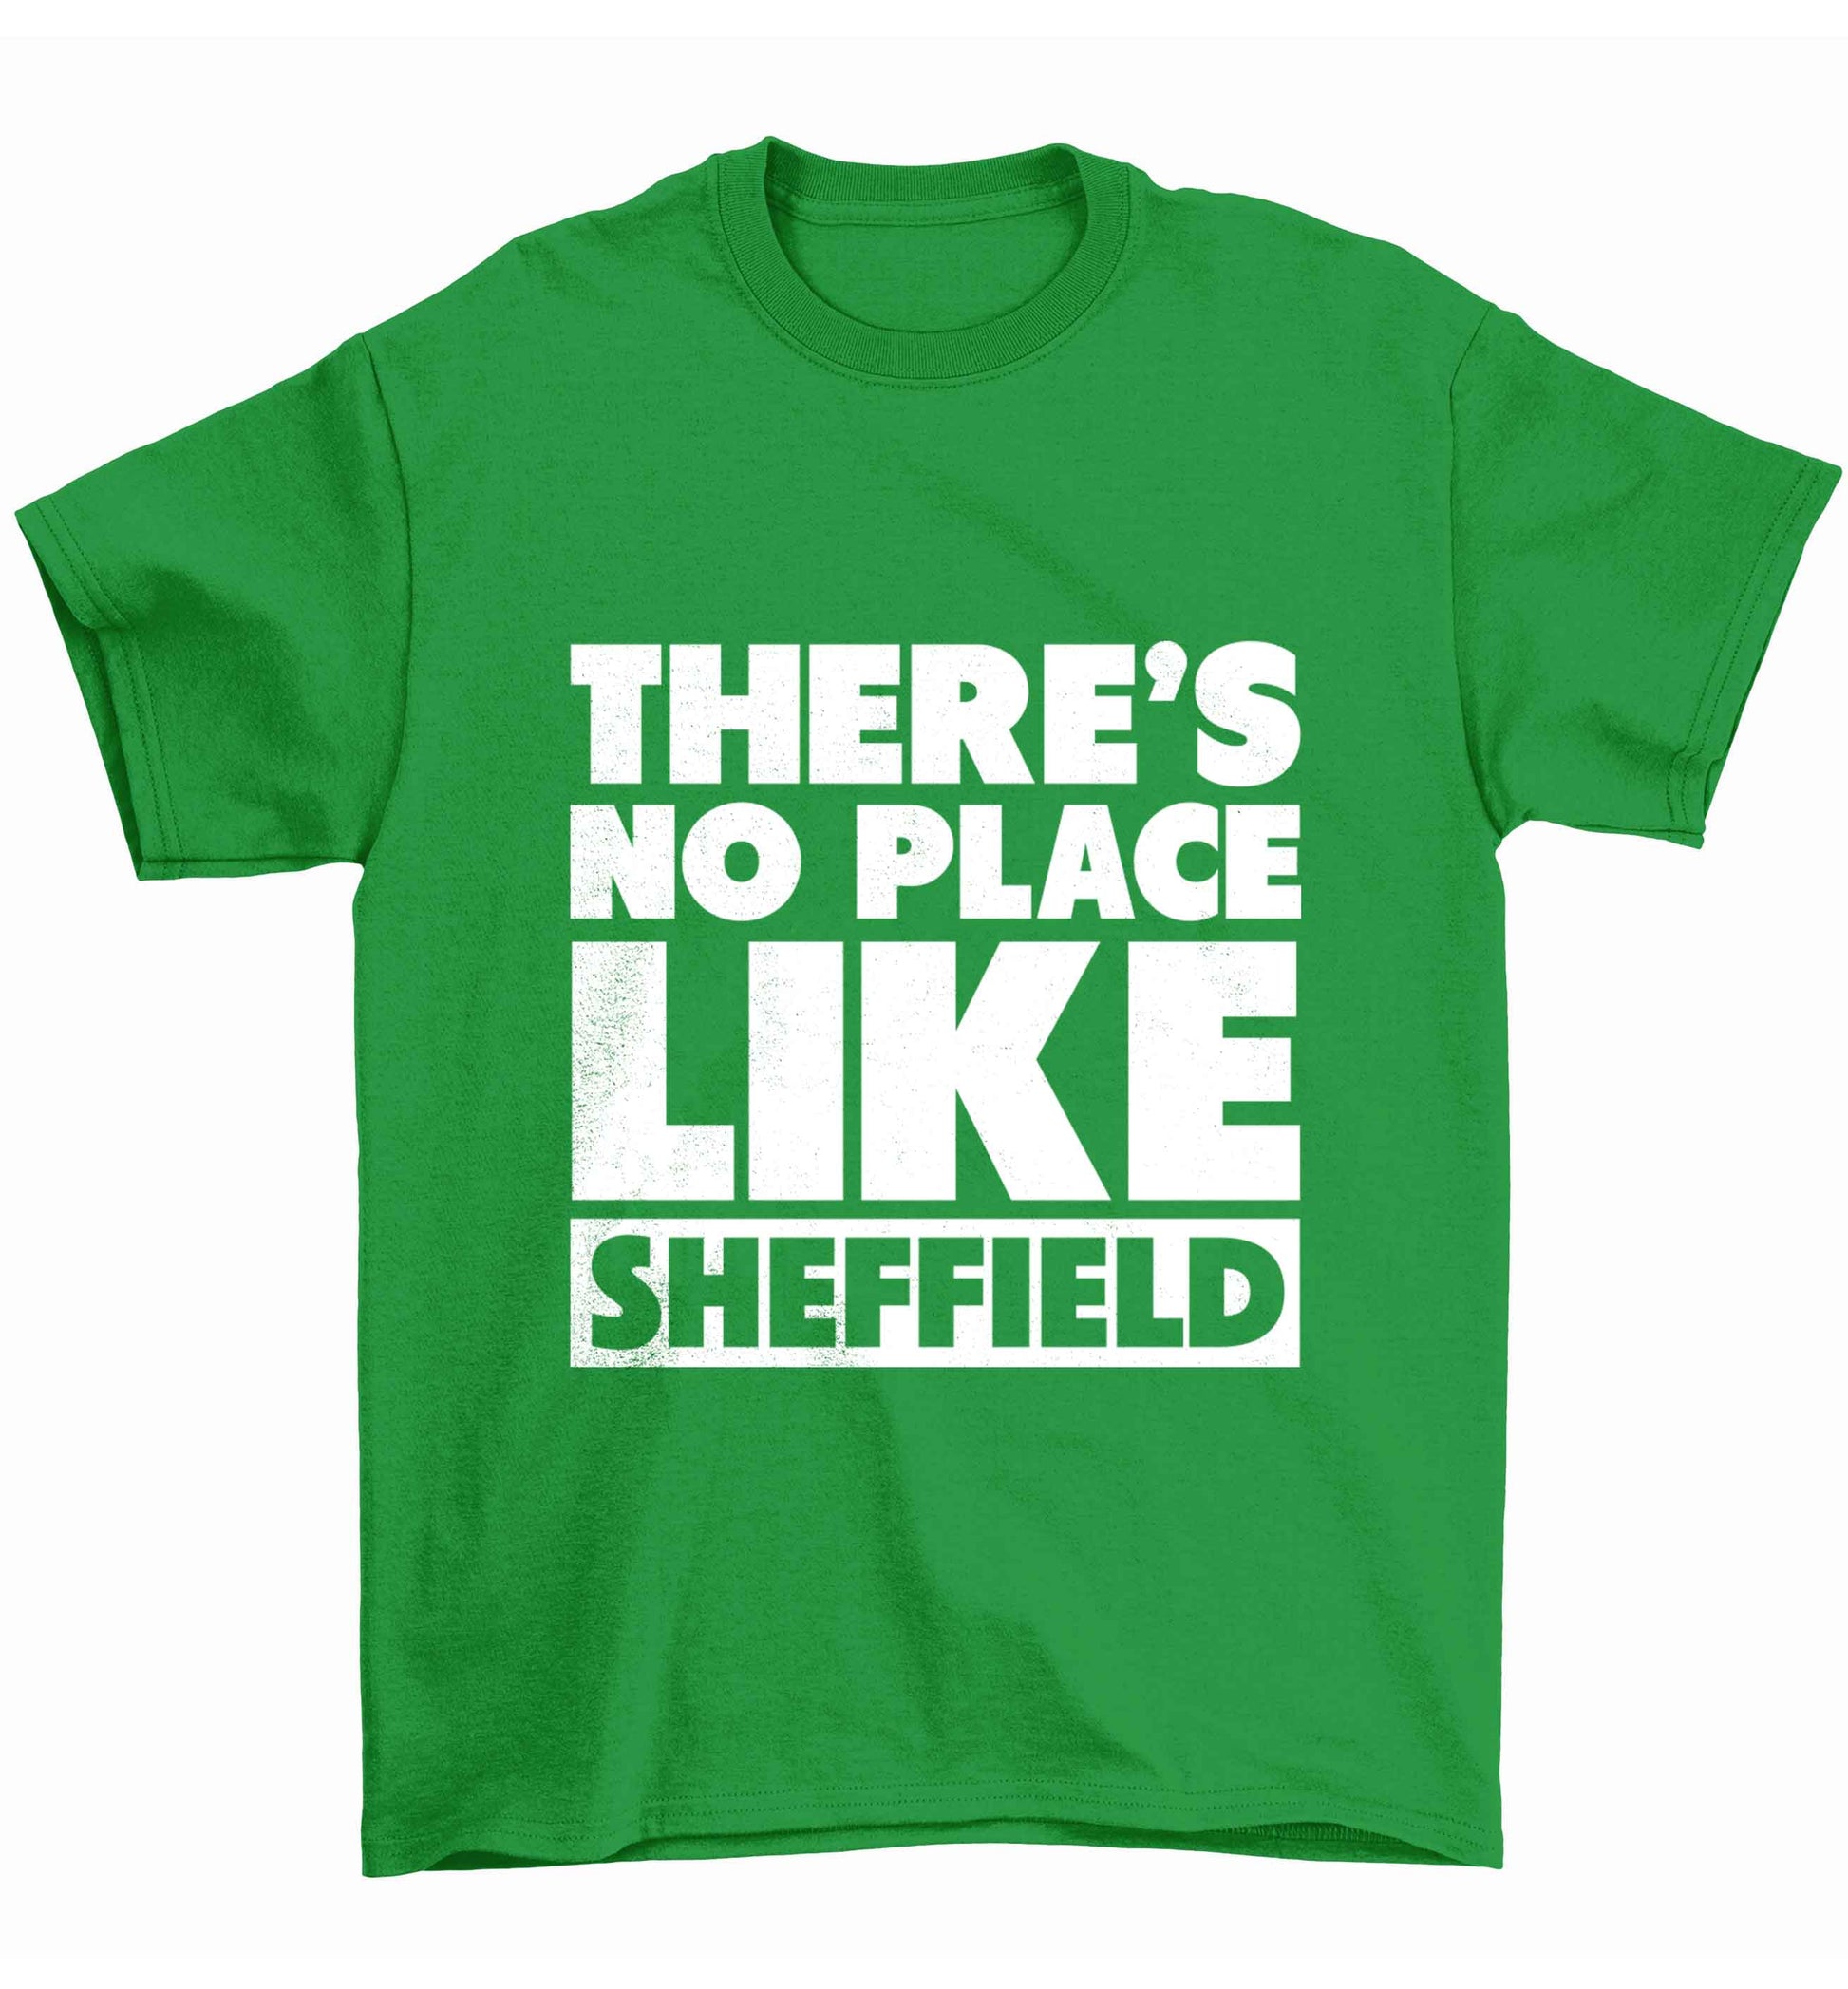 There's no place like Sheffield Children's green Tshirt 12-13 Years